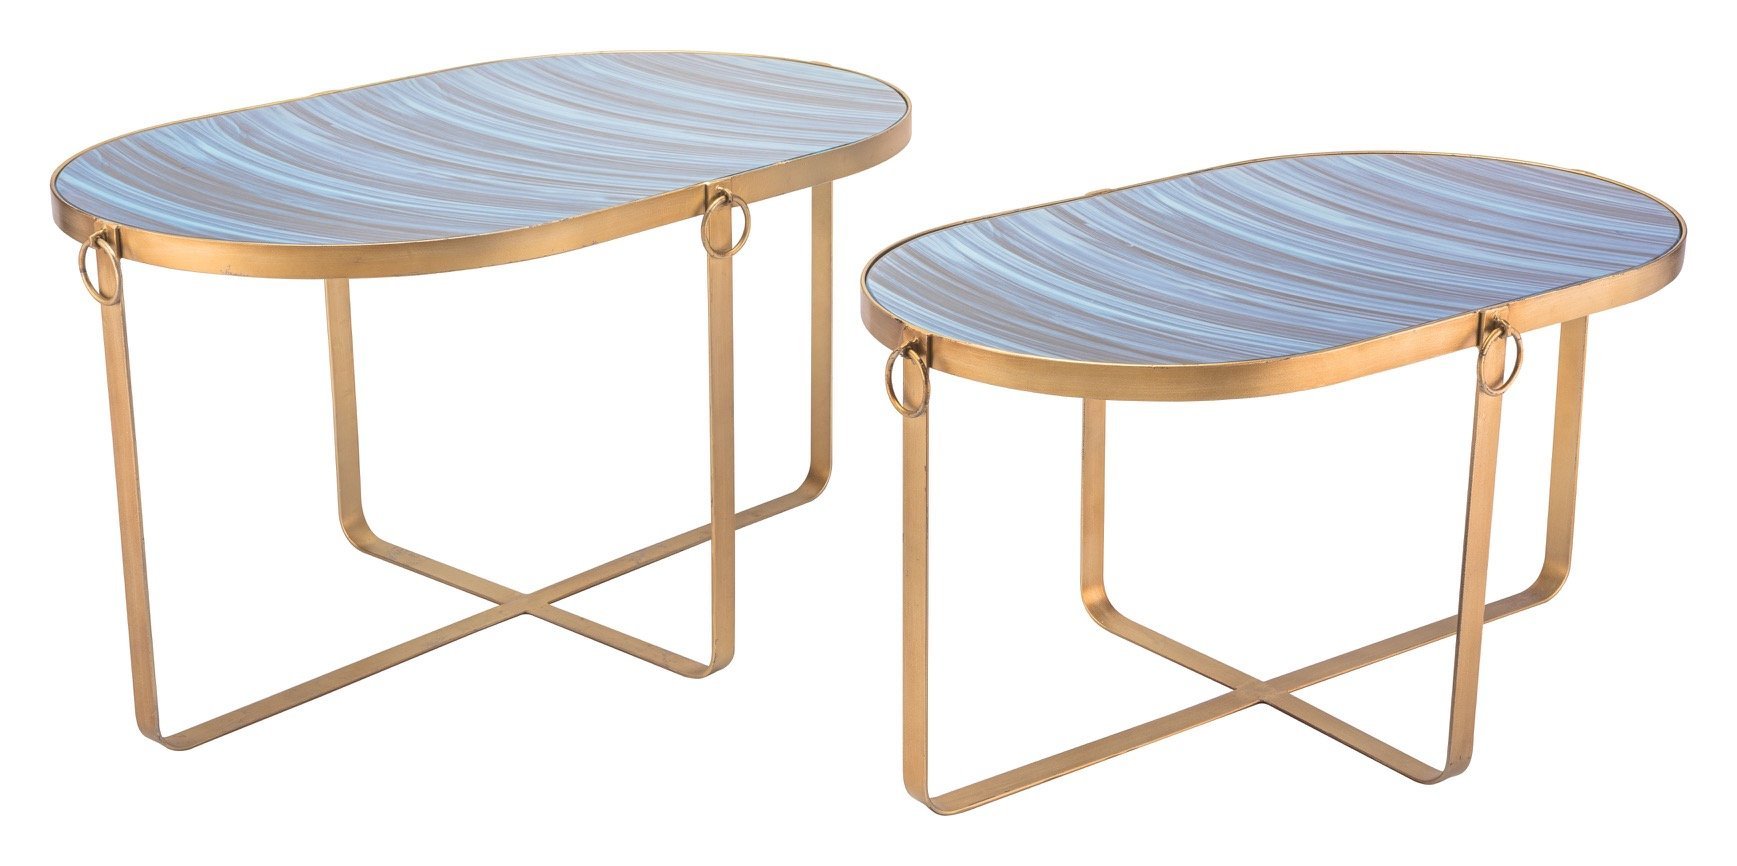 zaphire set accent tables blue antique gold side alan decor table baby changing pad console furniture espresso wood end oval coffee west elm outdoor mirrored gray target whangarei